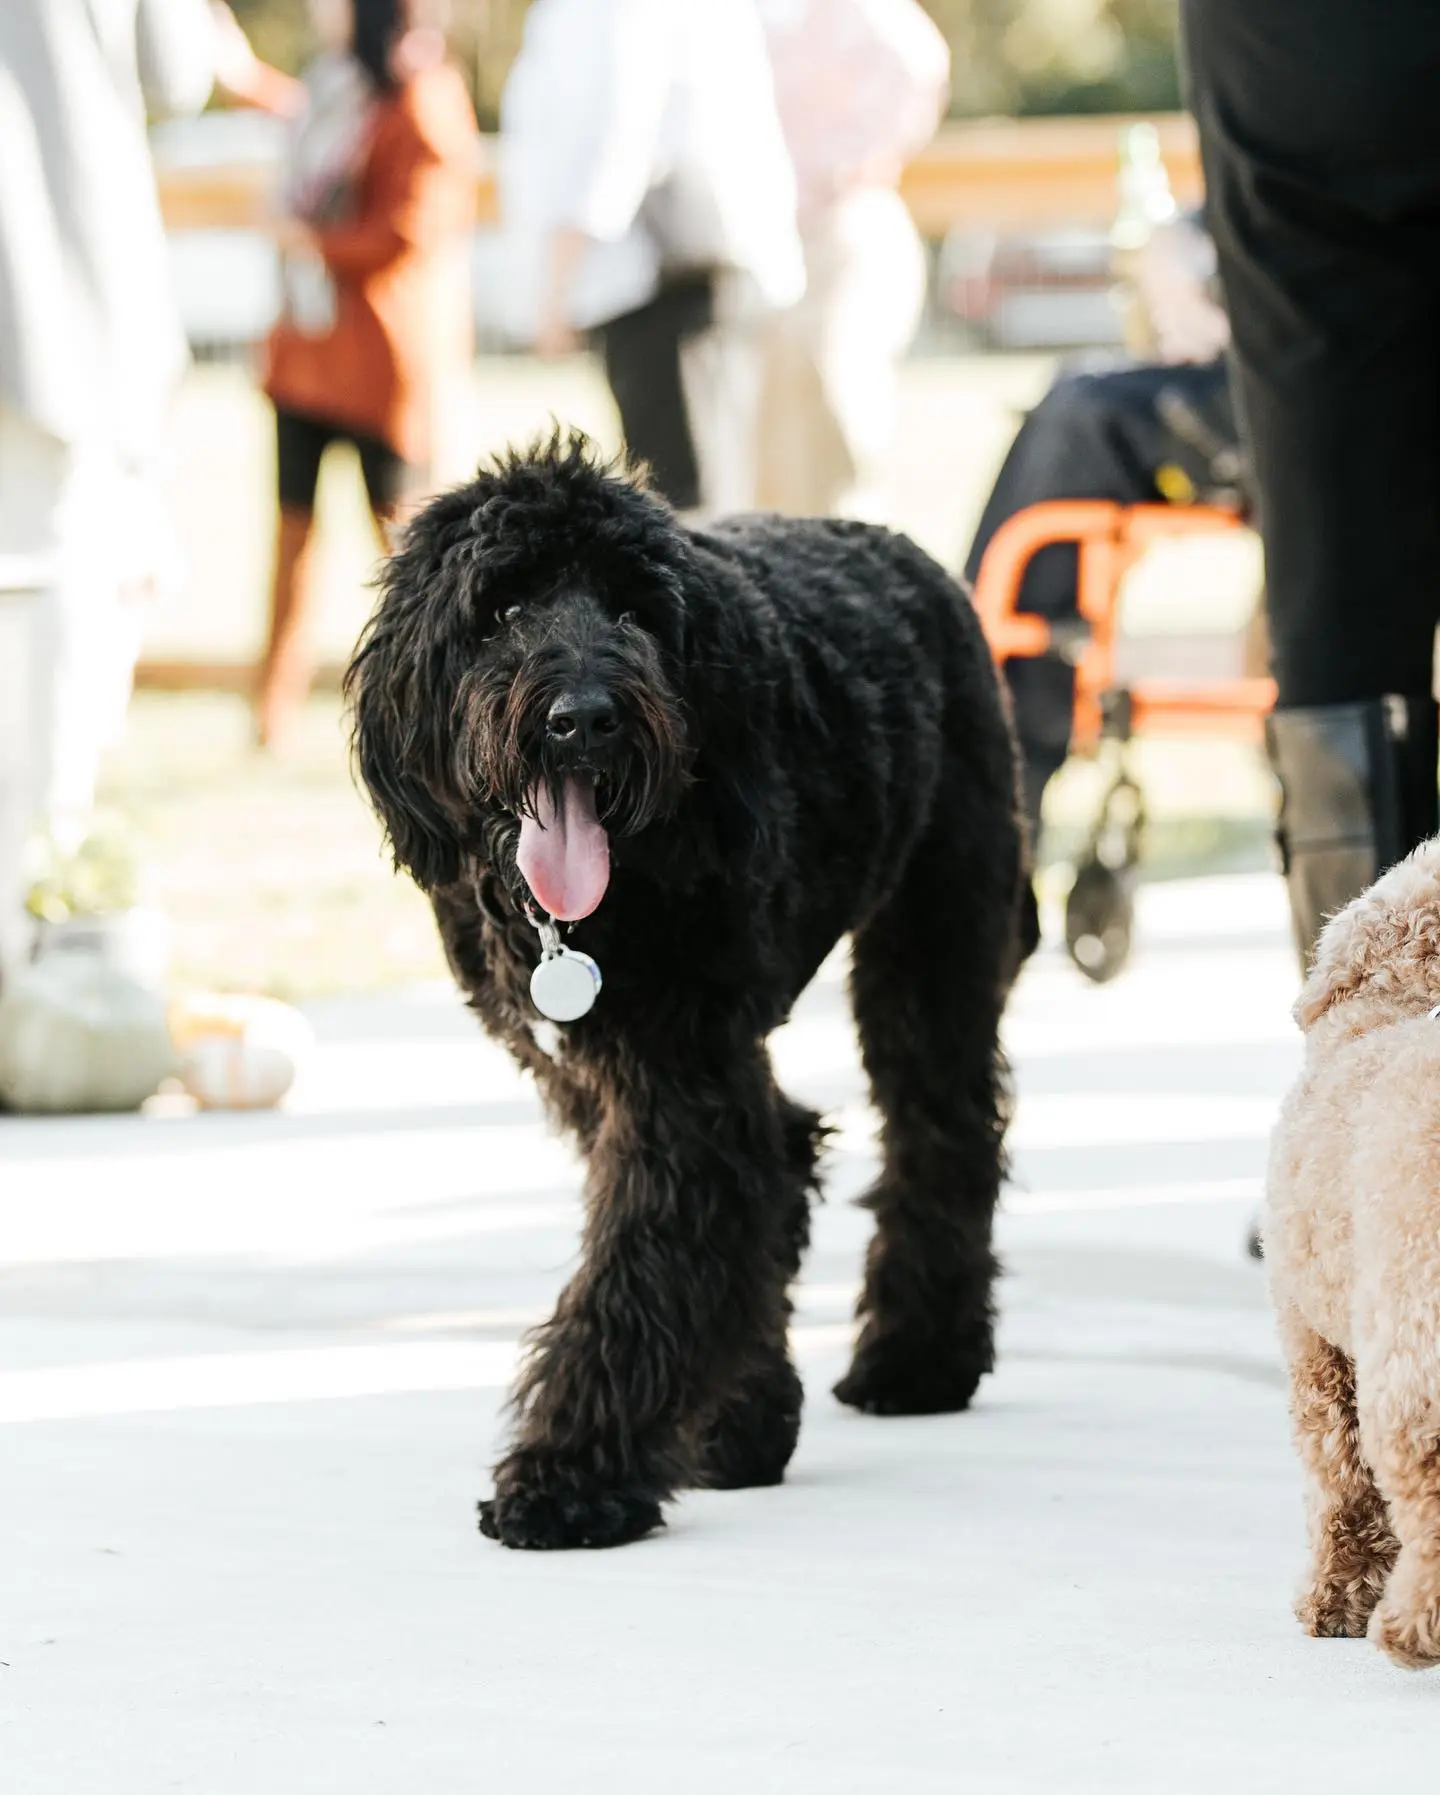 An example of why you should get a black golden doodle from Smeraglia Teddybear Goldendoodles